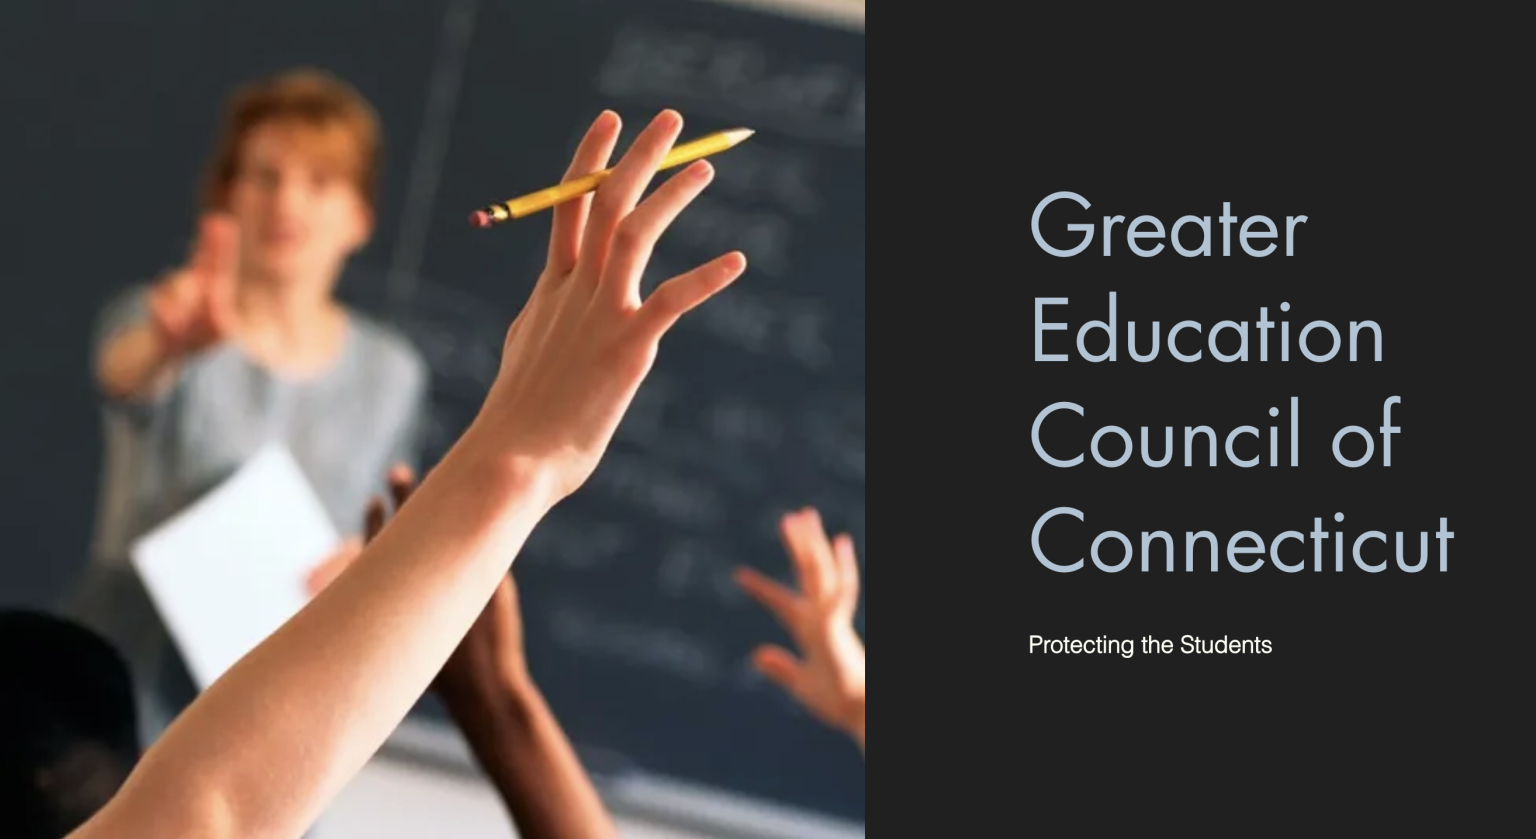 Greater Education Council Of CT Issues Cease And Desist Letter To Guilford Schools Over Equity Efforts, School Issues Scathing Response